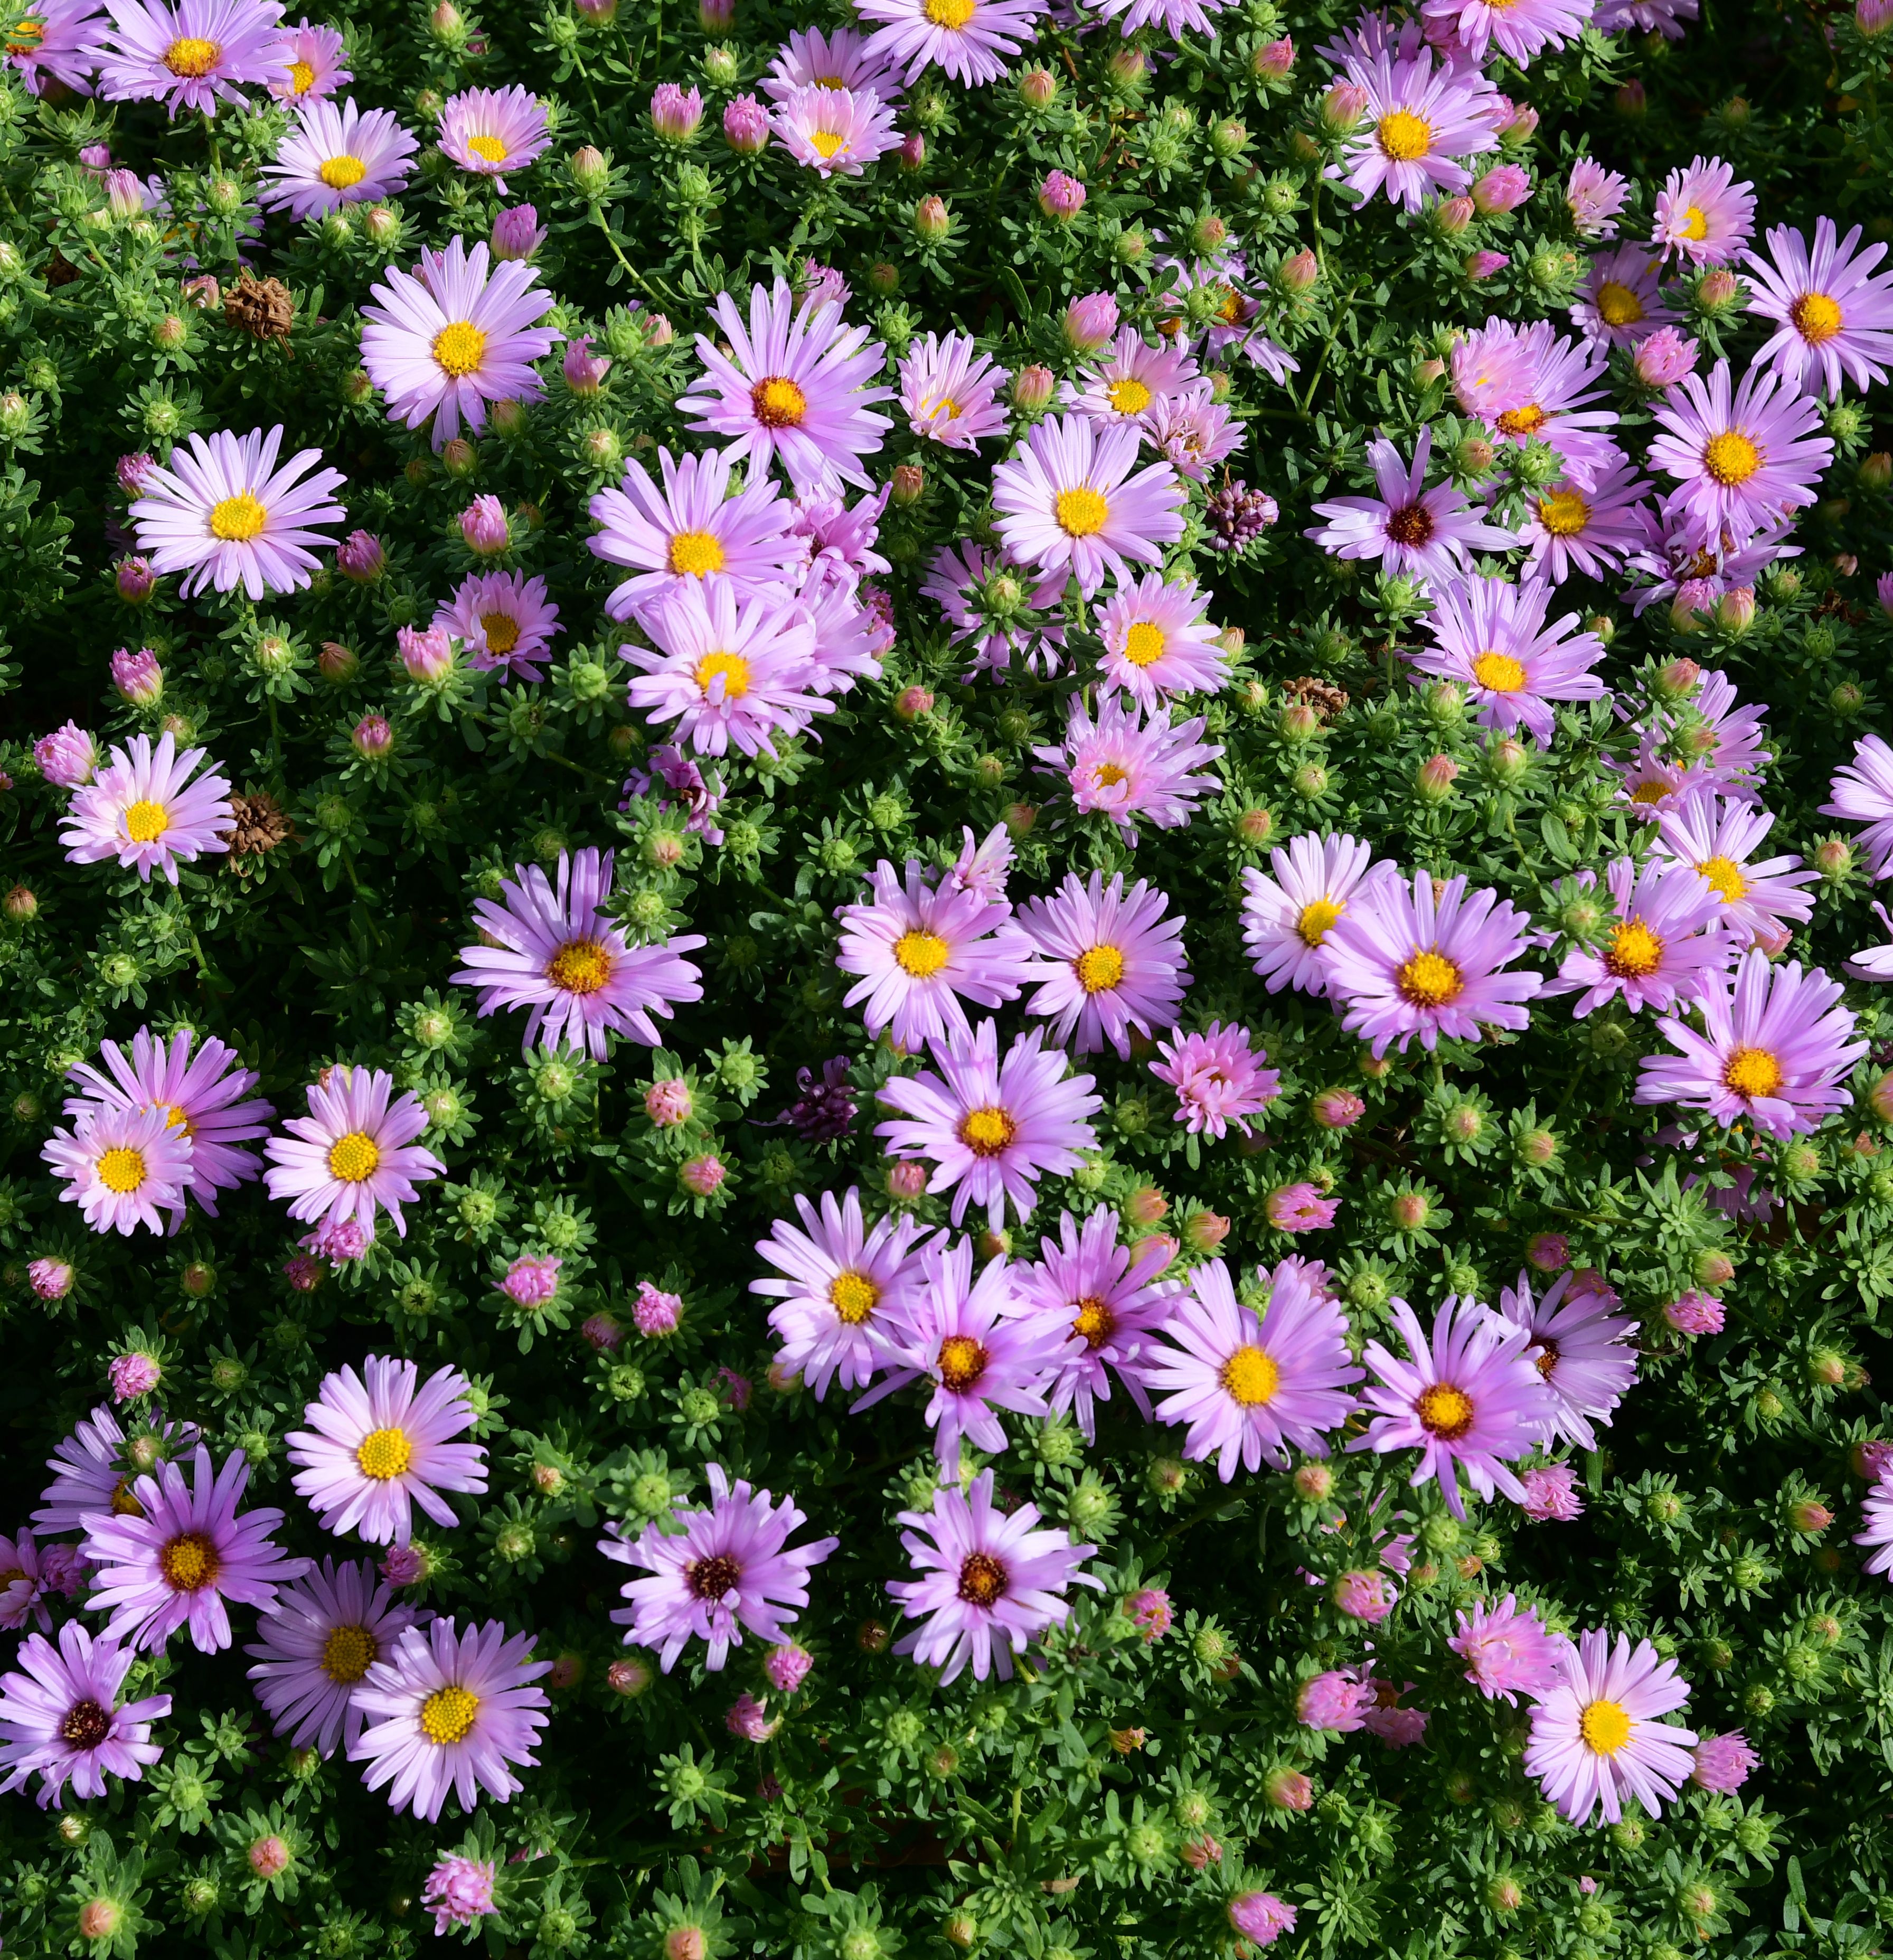 images/plants/aster/ast-billowing-pink/ast-billowing-pink-0003.jpg